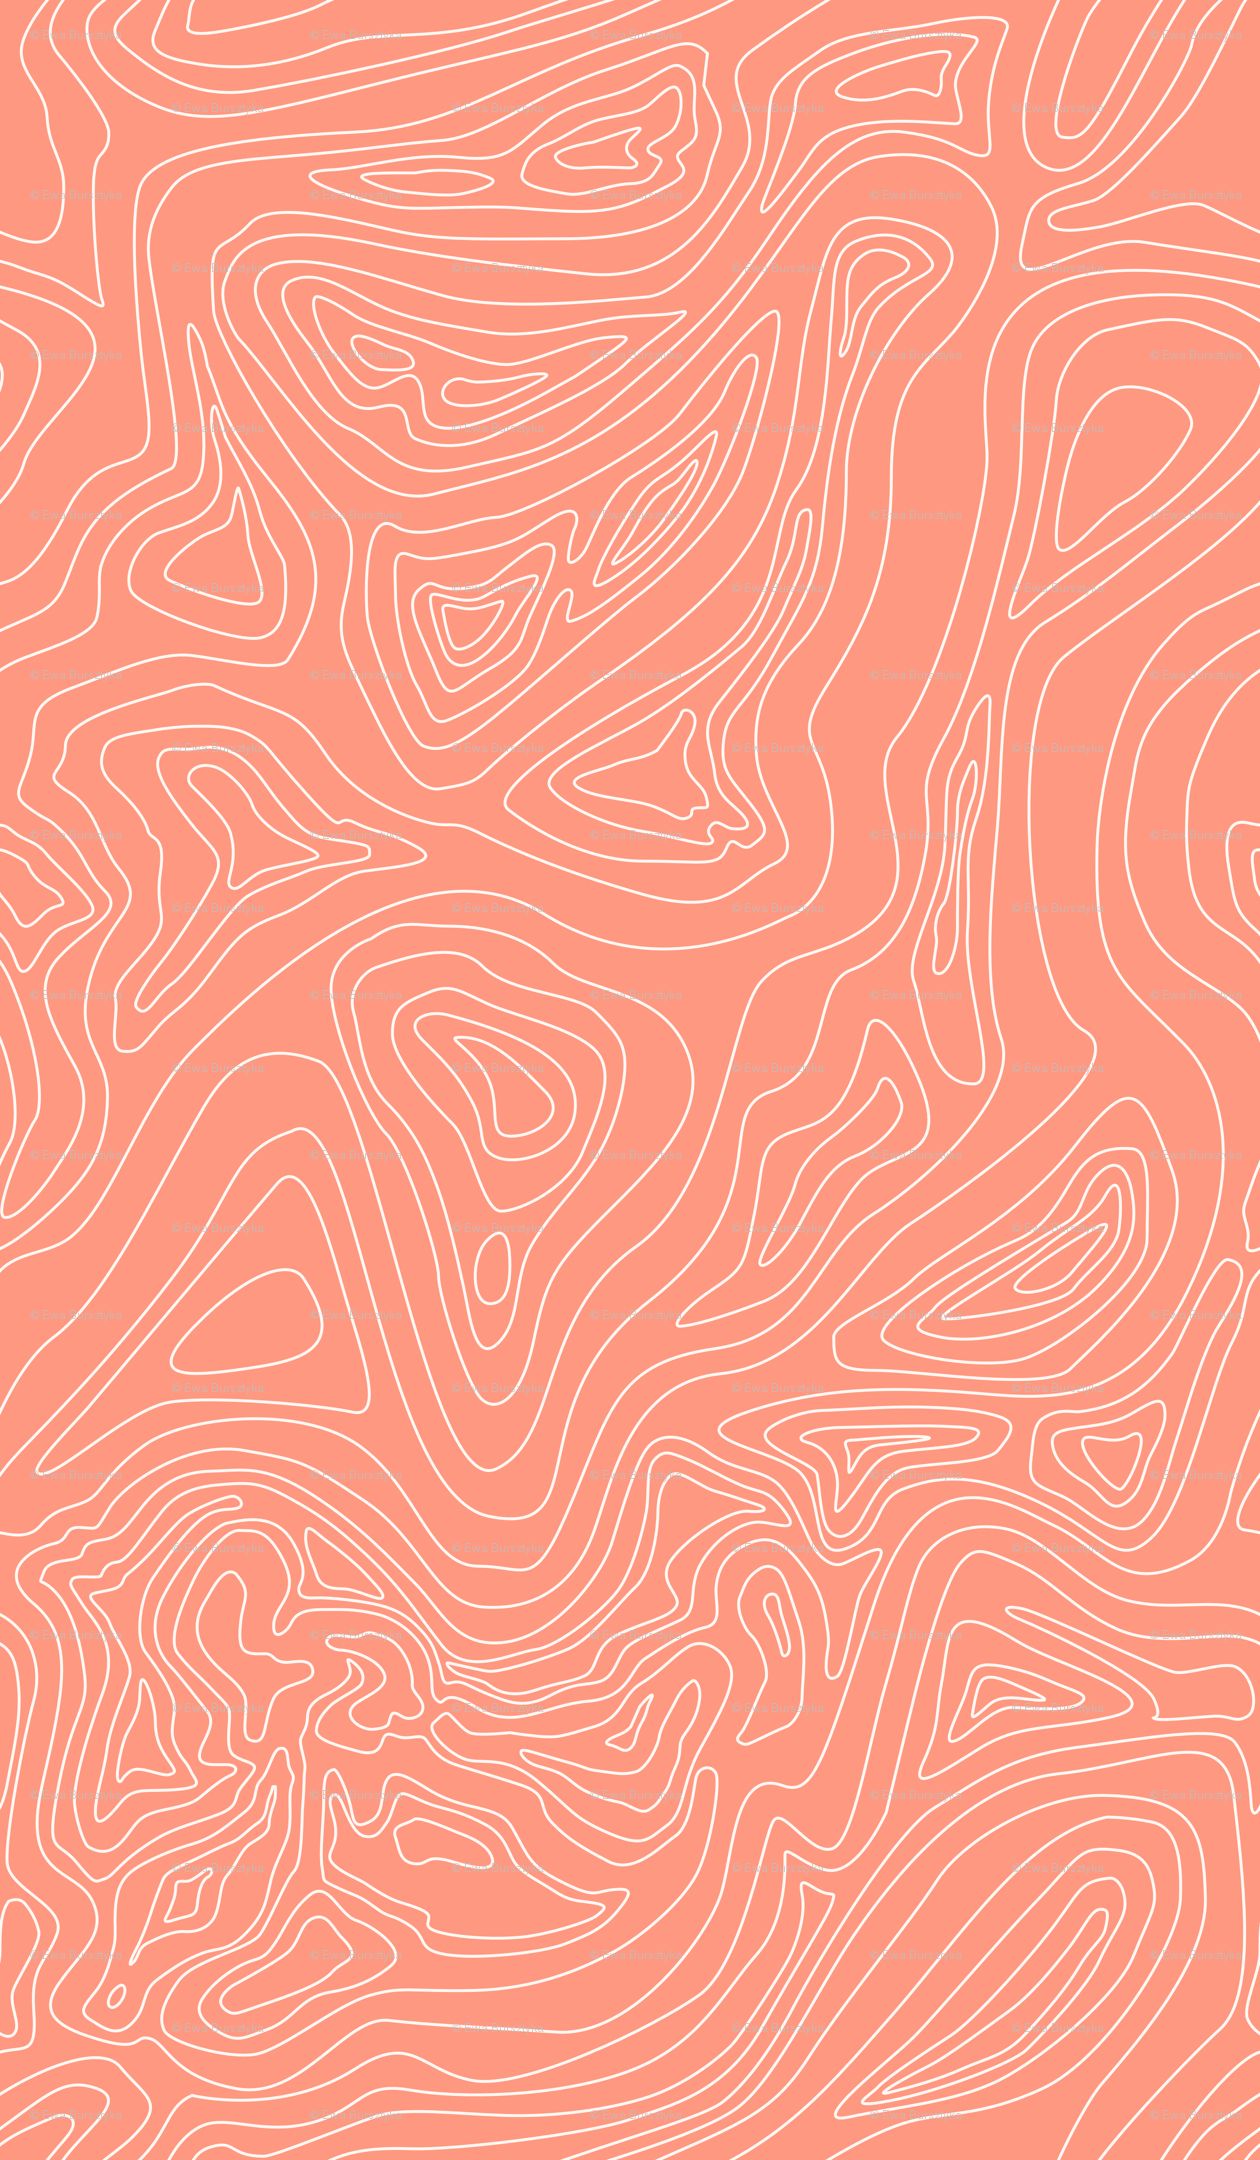 A topographic map pattern in white on a salmon pink background - Coral, salmon